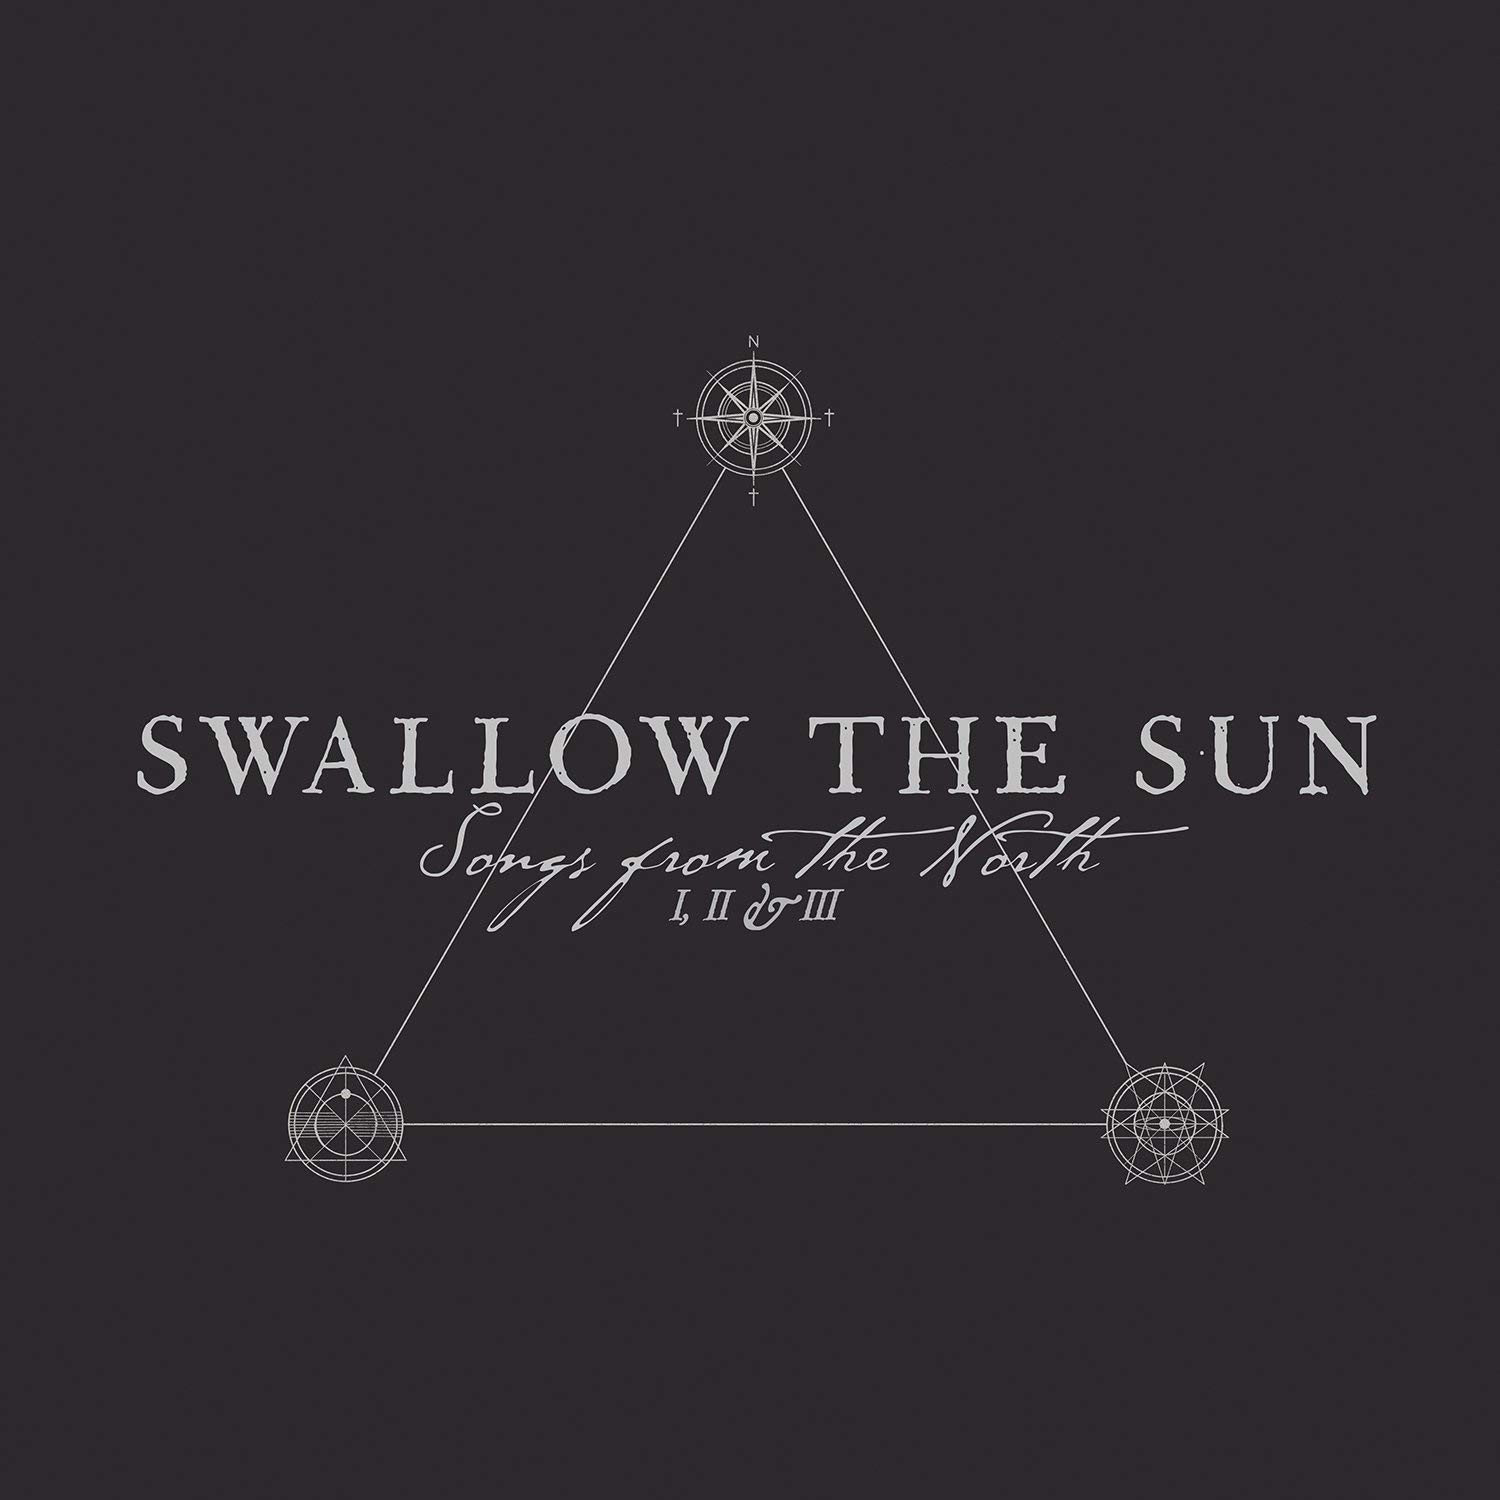 Vinylplade Swallow The Sun Songs From the North I, II & III (5 LP)